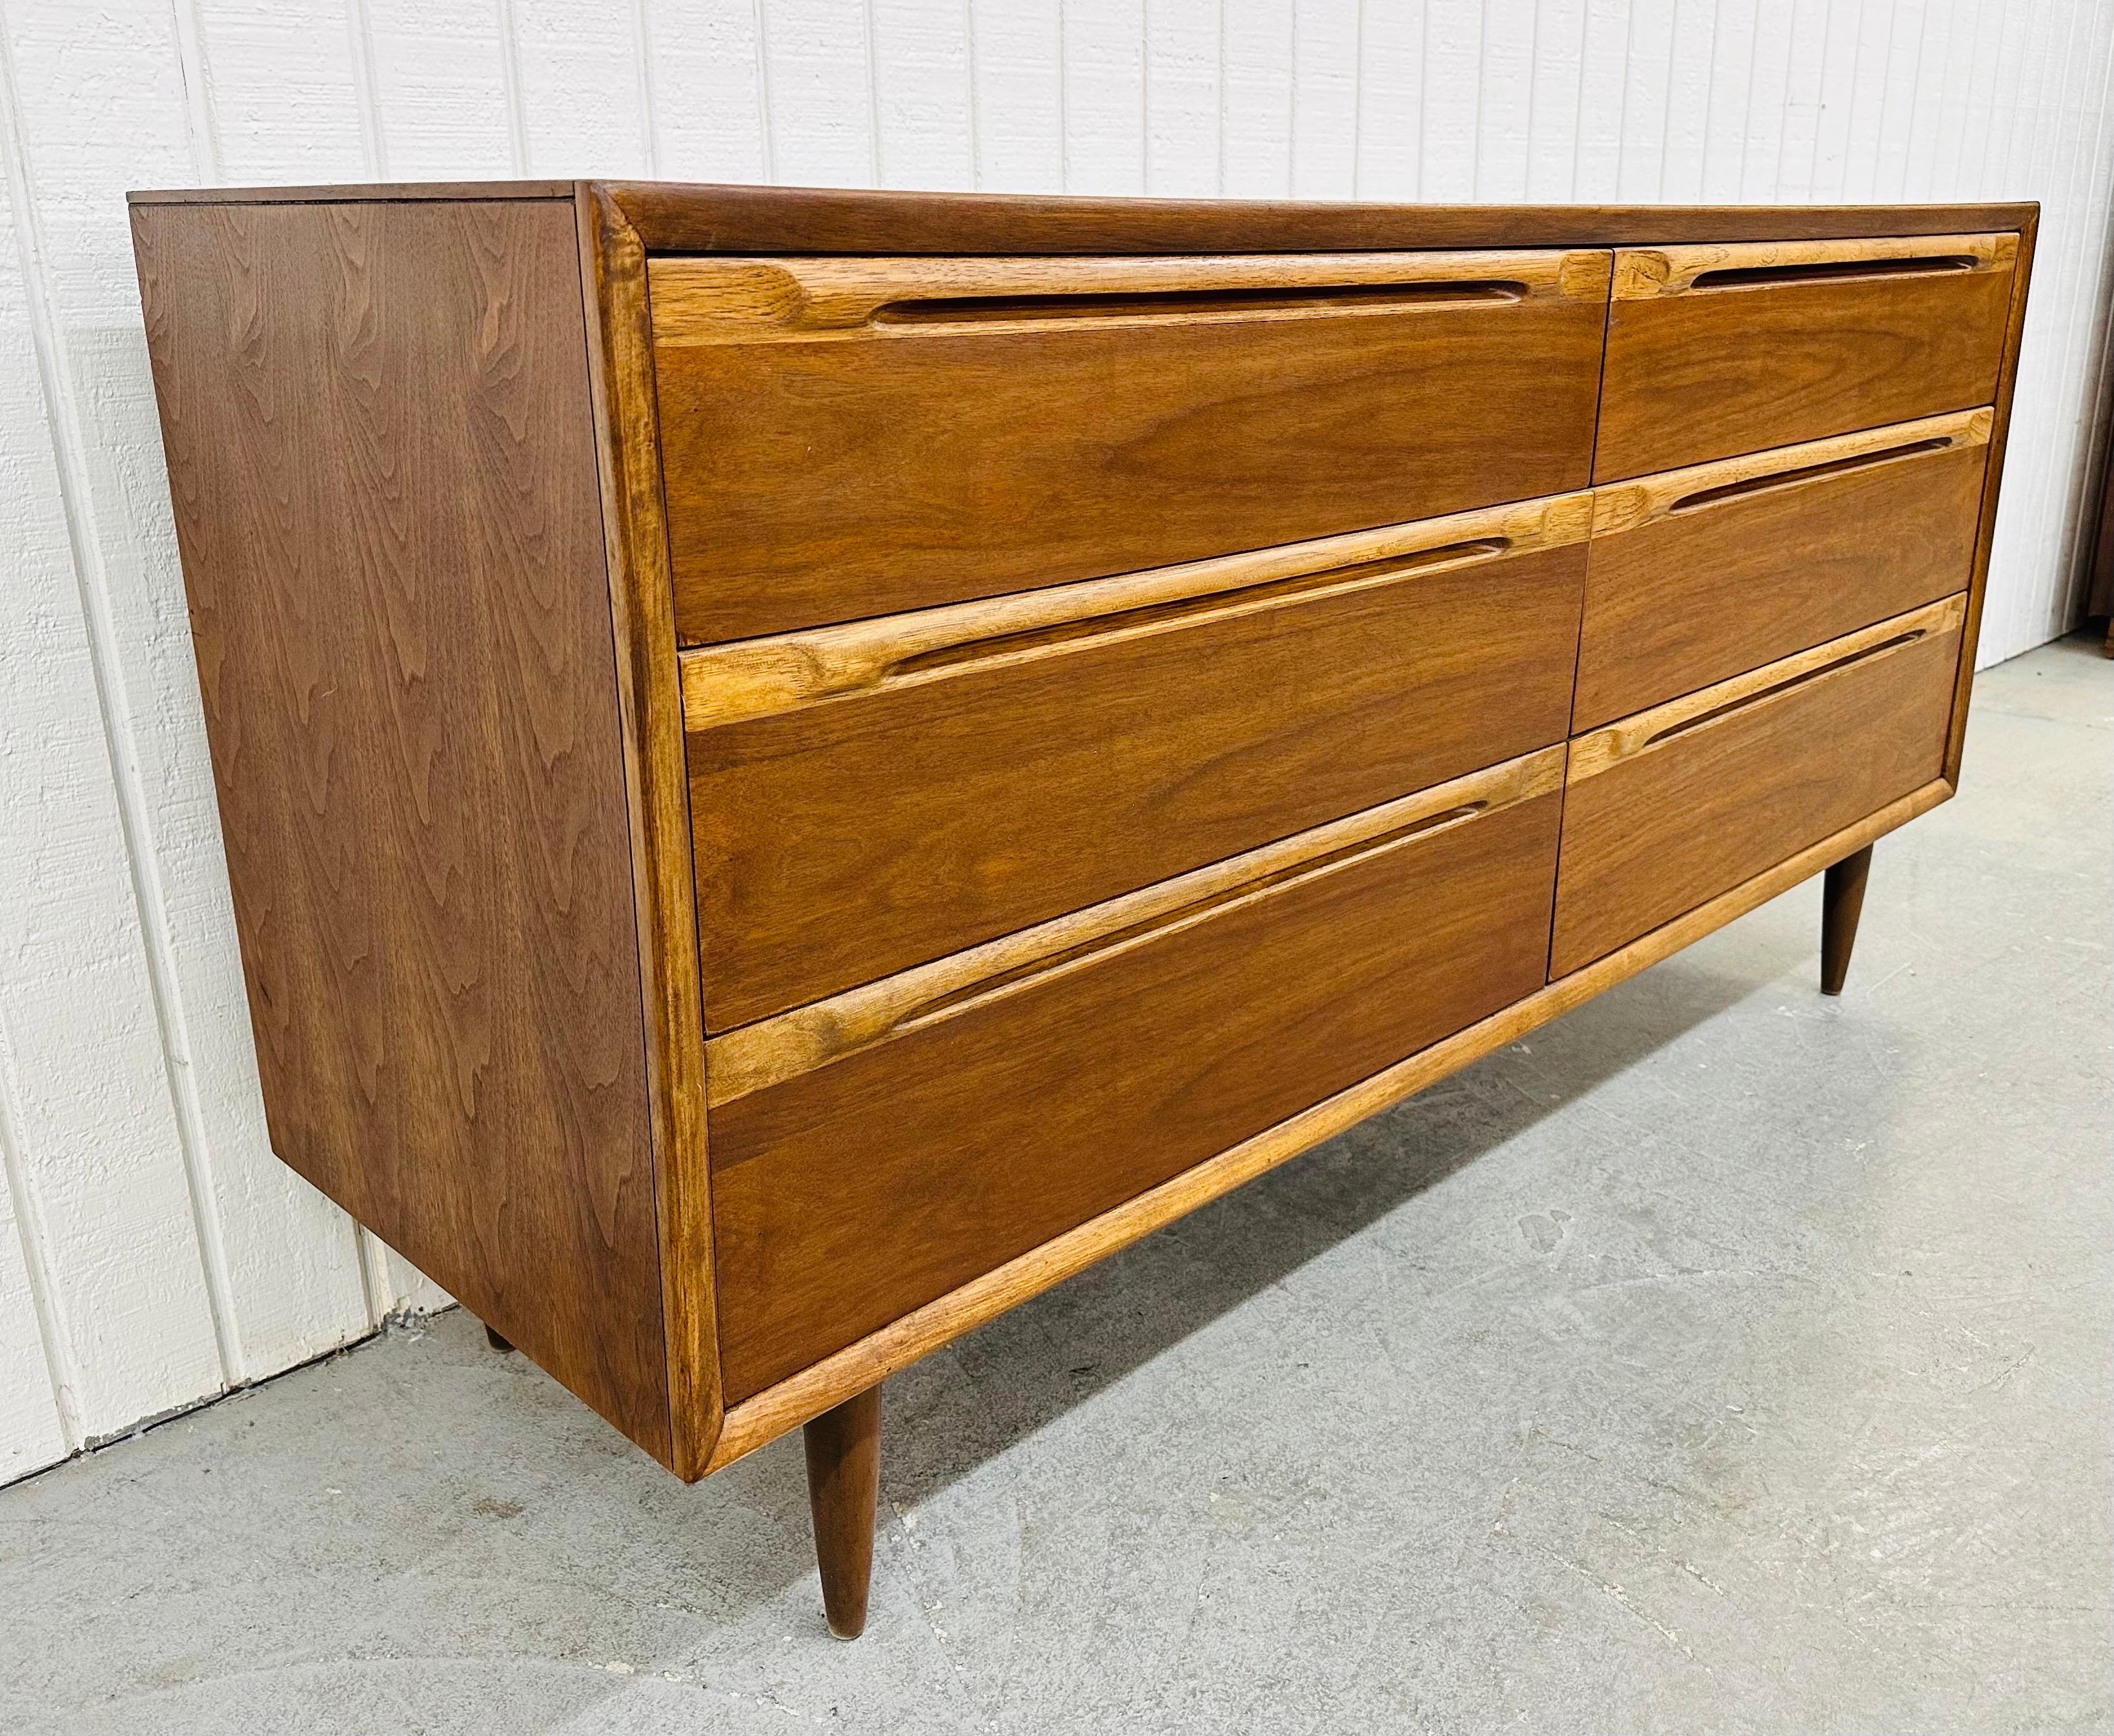 This listing is for a Mid-Century Modern Walnut Double Dresser. Featuring a straight line design, six large drawers for storage, recessed wooden pulls, modern legs, and a beautiful walnut finish! This is an exceptional combination of quality and